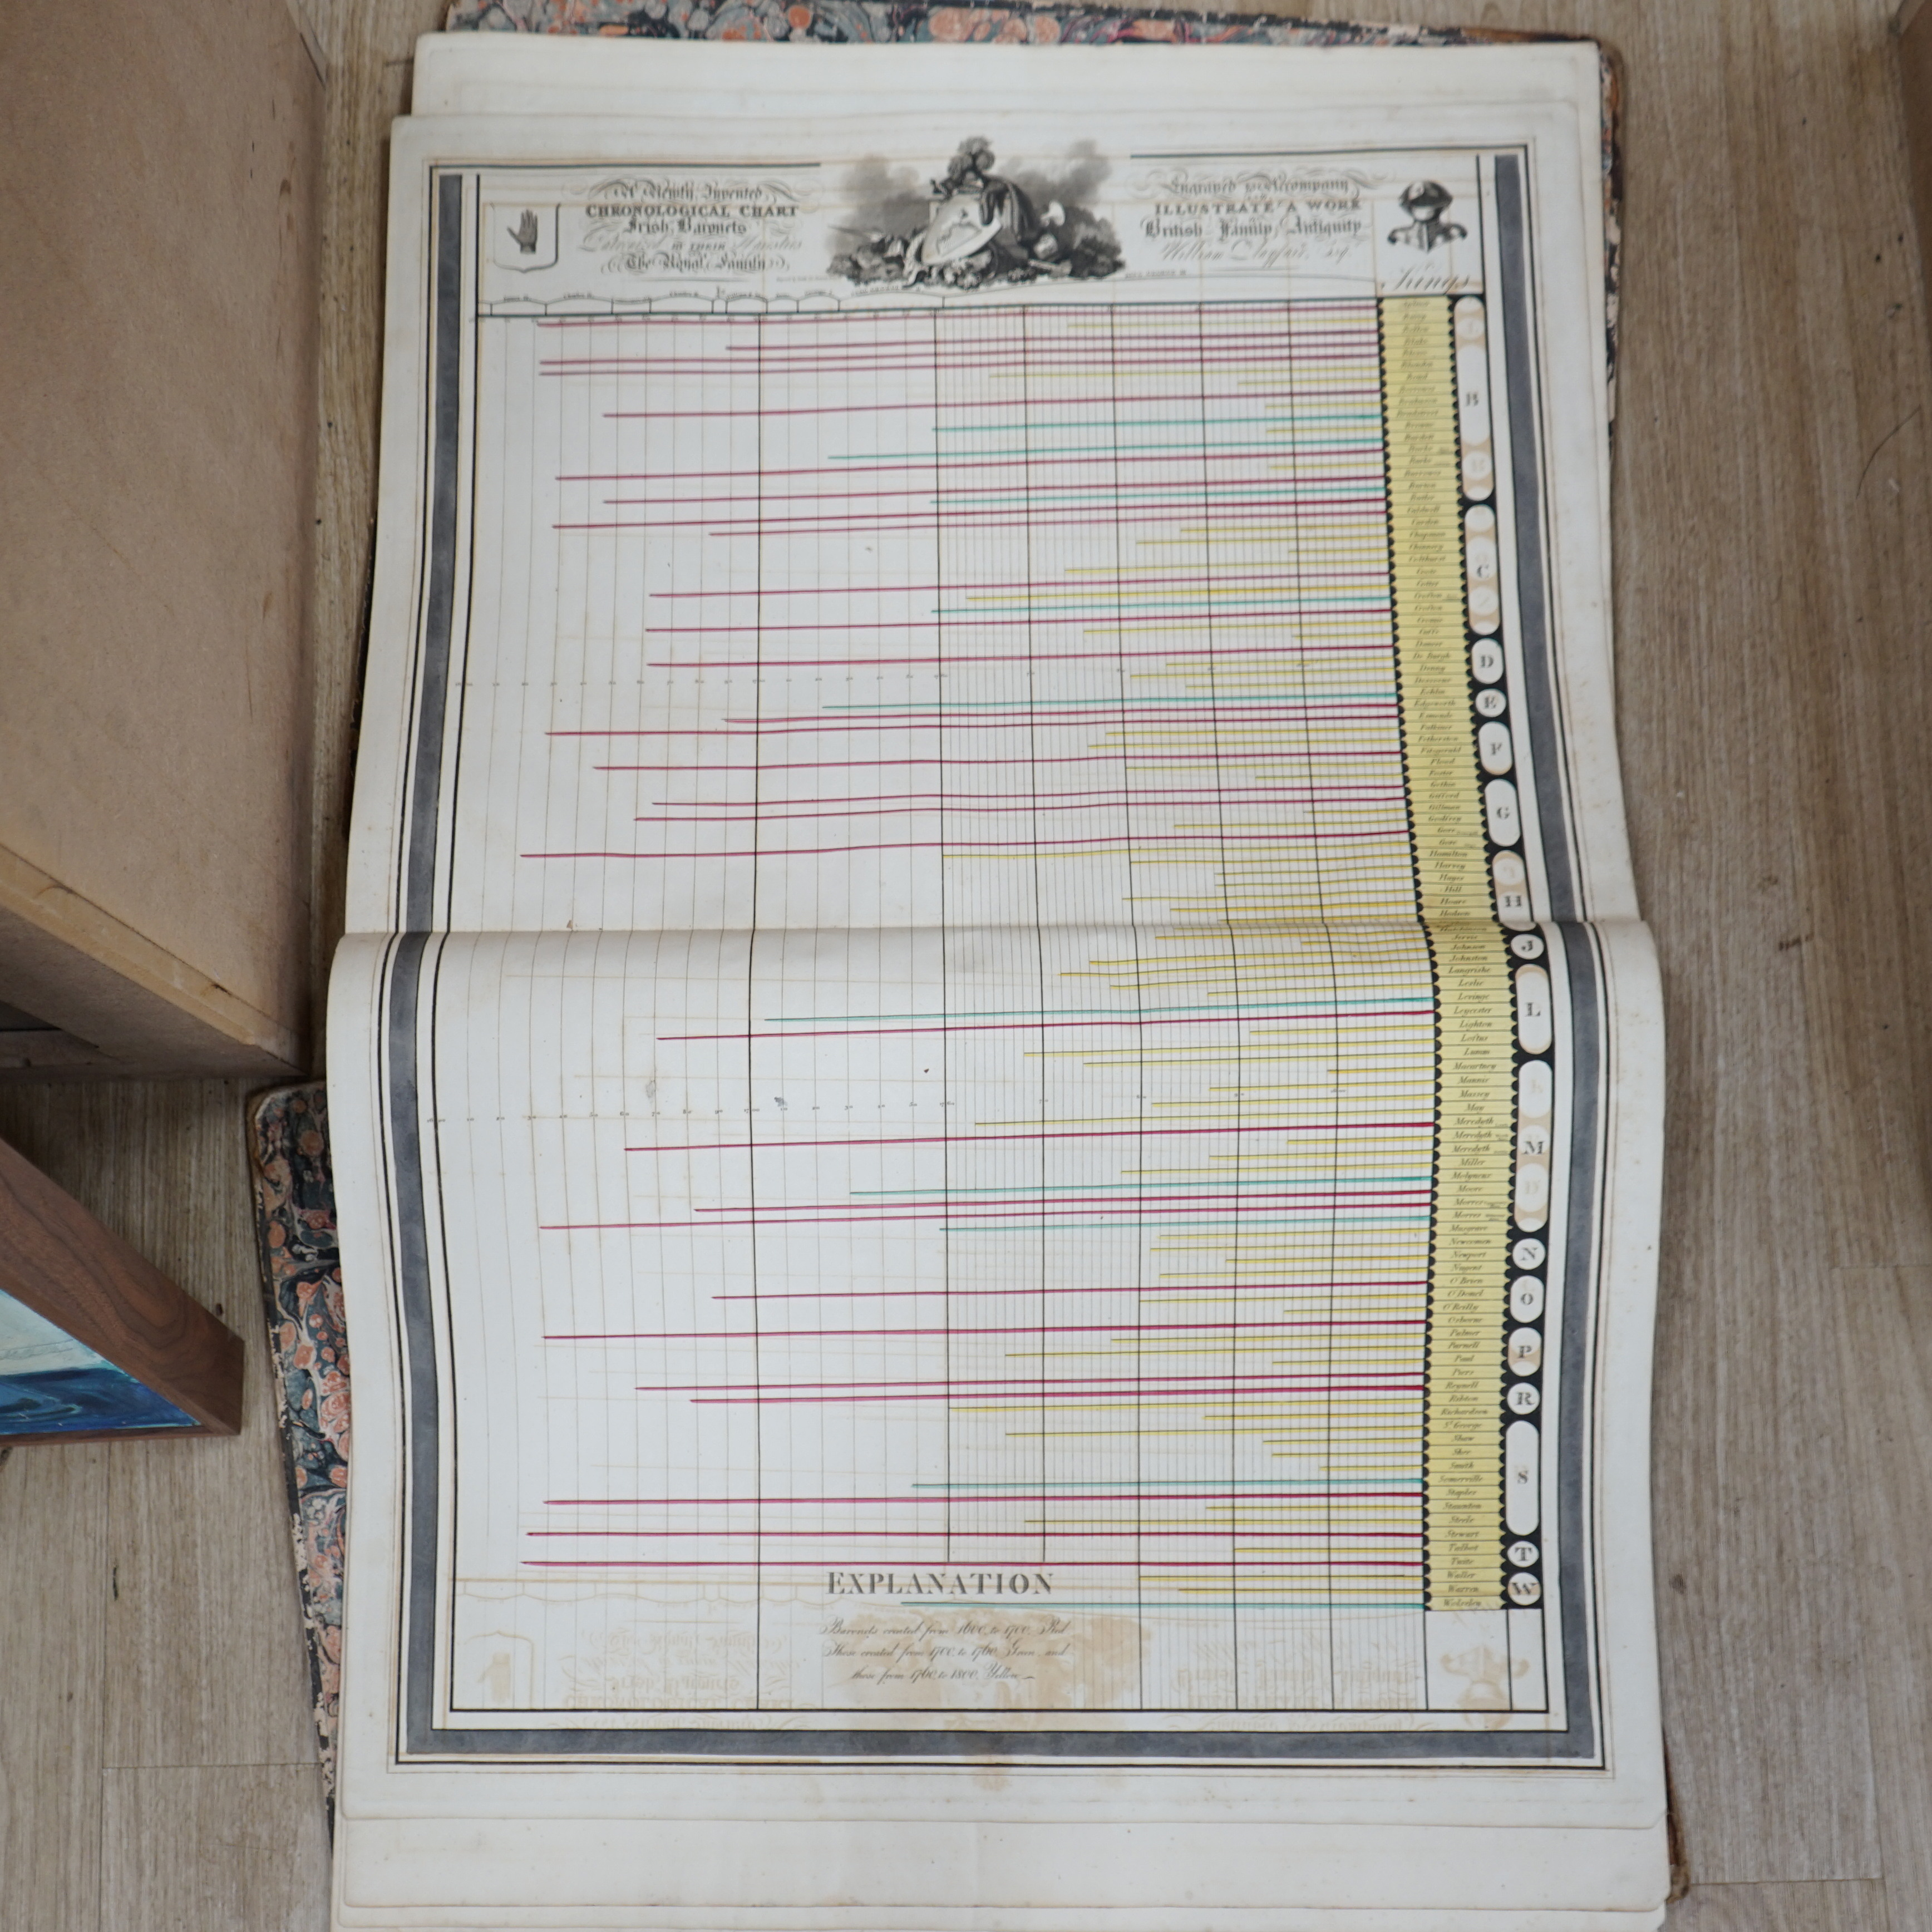 Playfair, William - A Newly Invented Chronological Chart of British Nobility. Engraved to accompany & illustrate a Work on British Family Antiquity, folio, half calf, front board detached, with 8 double page hand-coloure